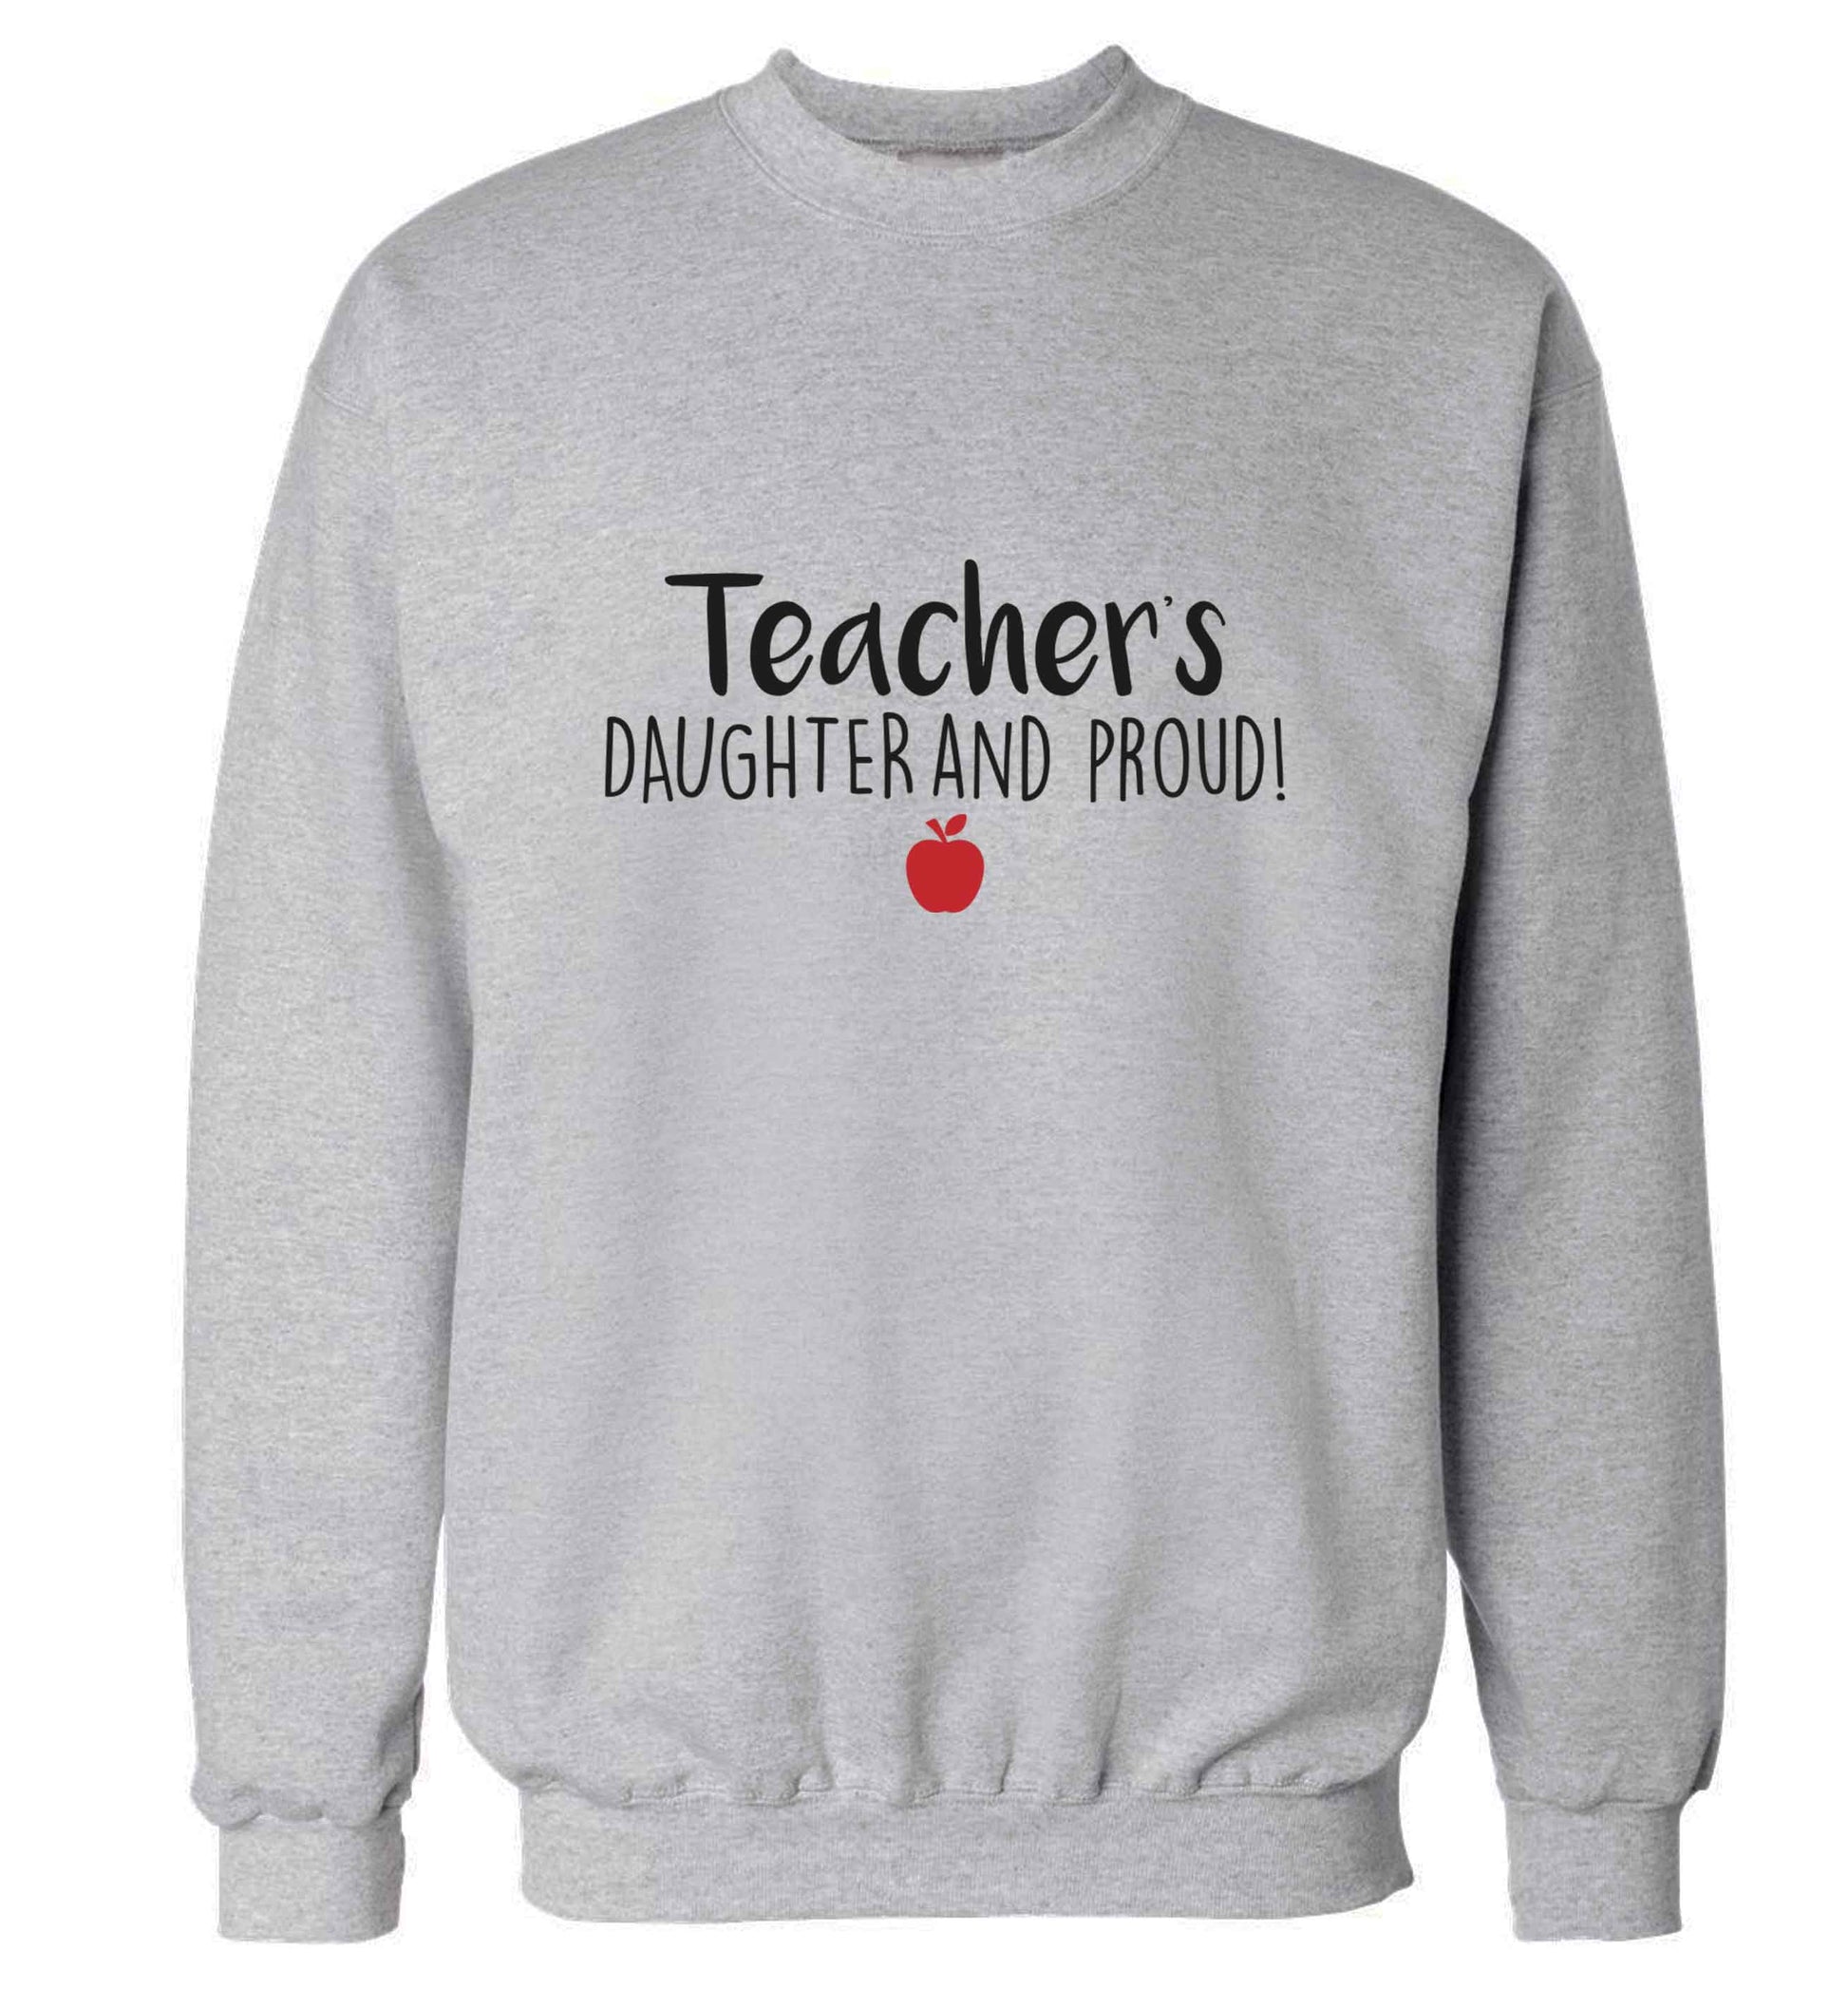 Teachers daughter and proud adult's unisex grey sweater 2XL